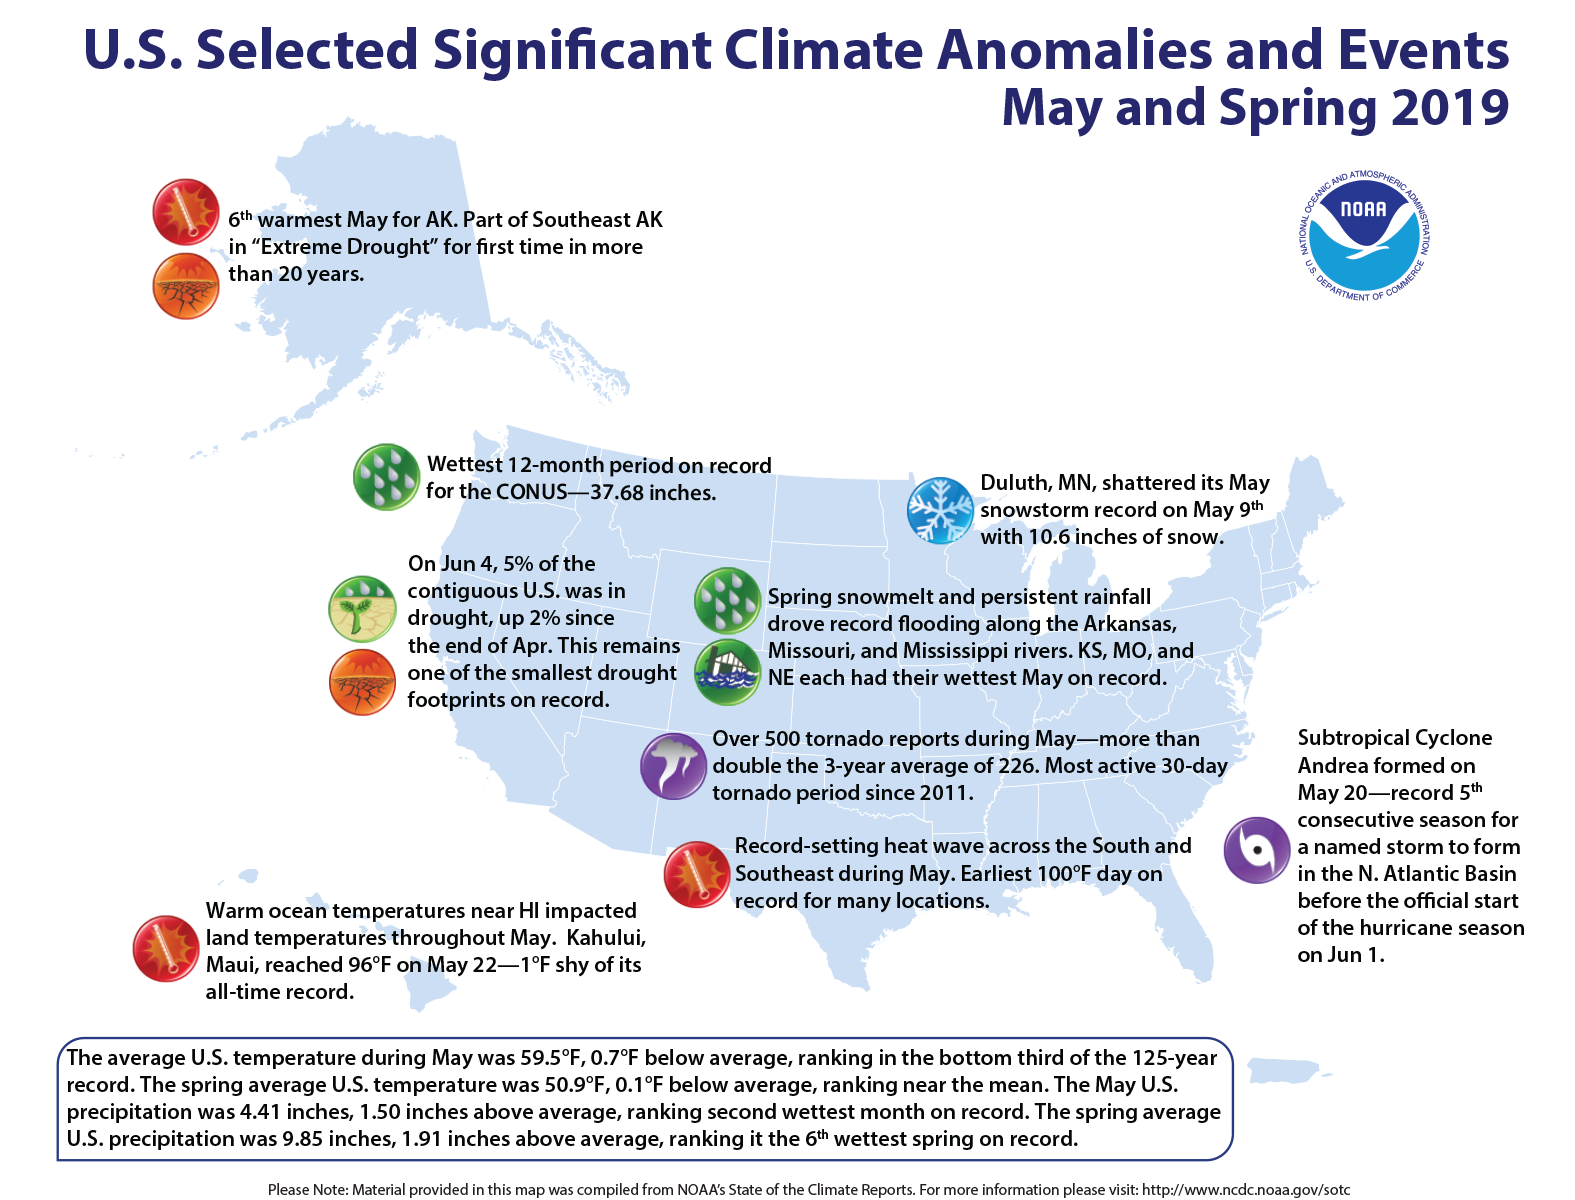 An annotated map of the United States showing notable climate events that occurred across the country during May 2019. For more, see the bulleted list below in the story and online at http://bit.ly/USClimate201905.